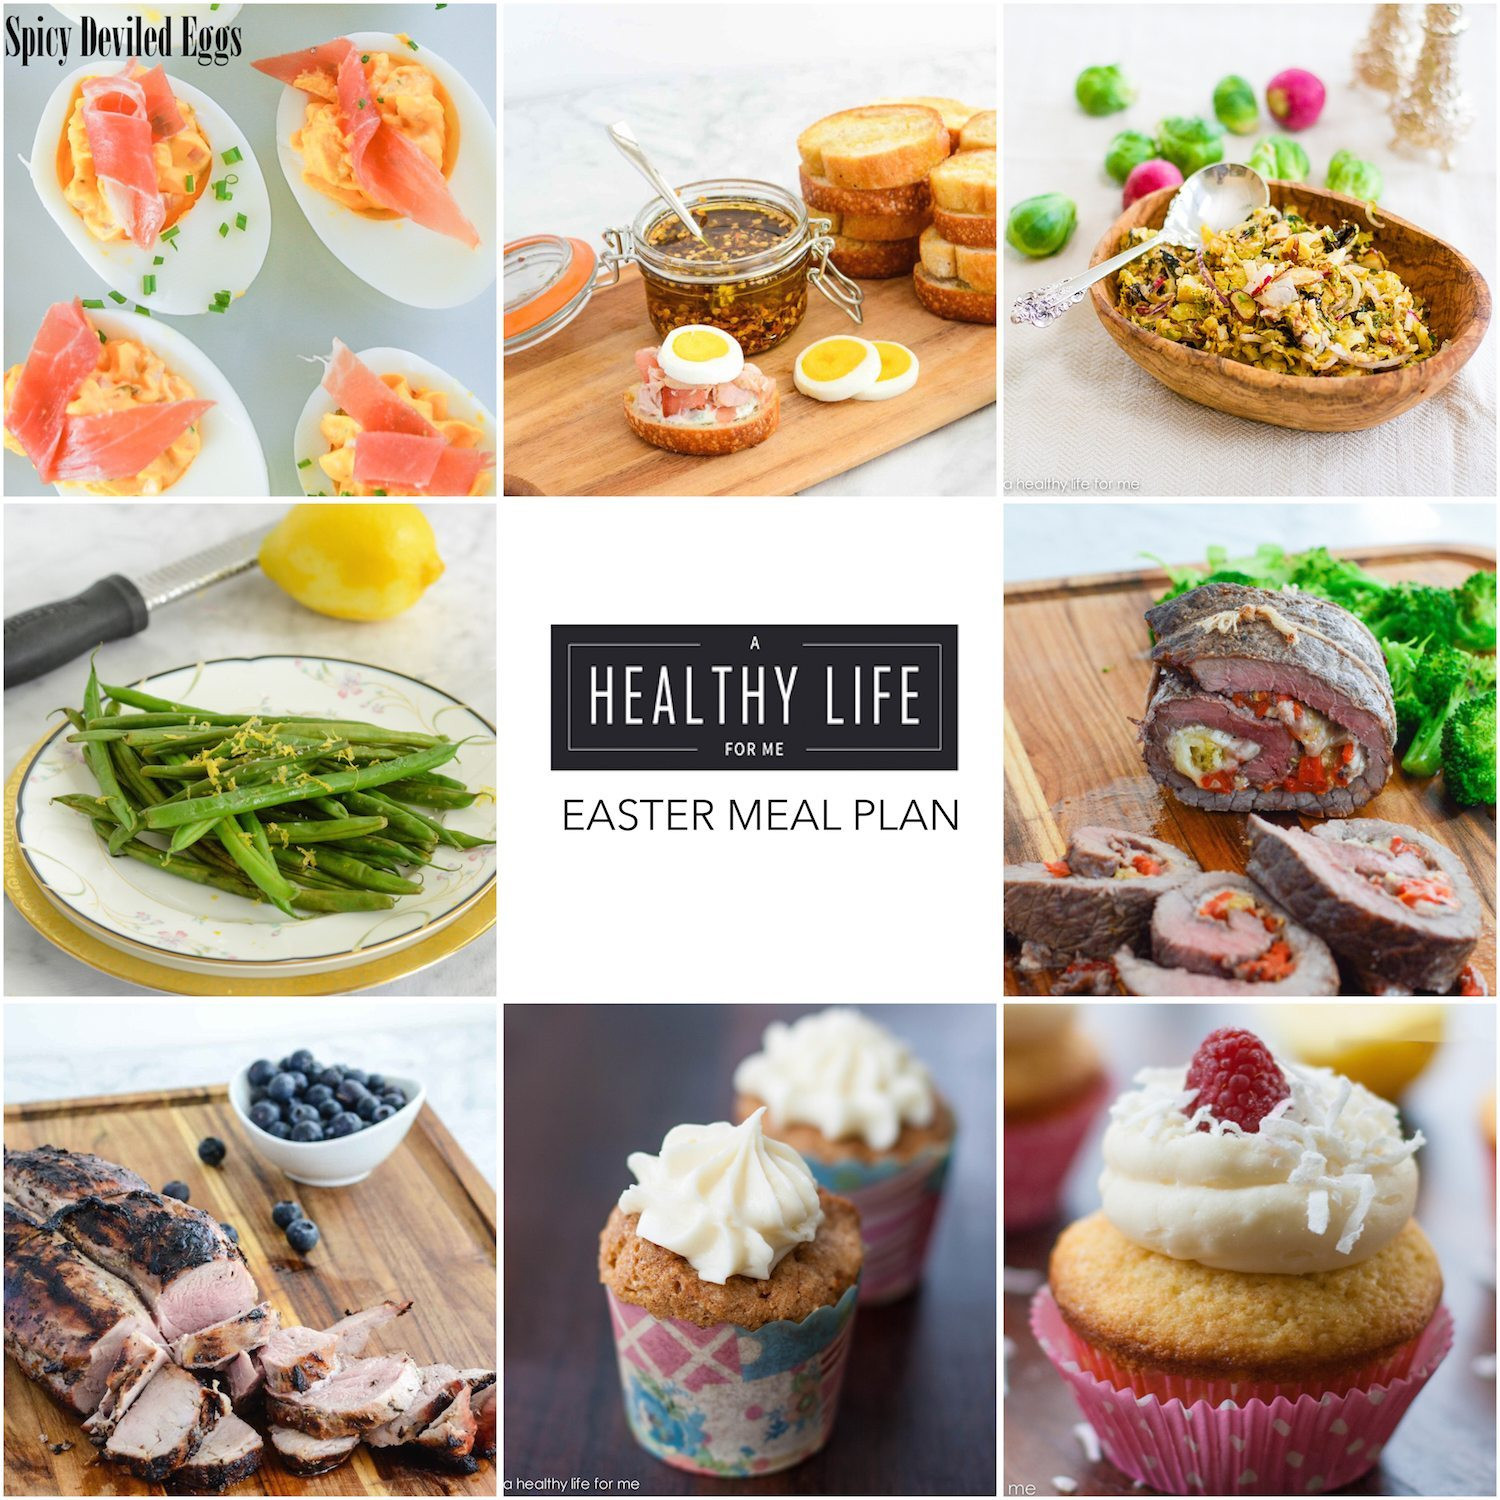 Suggestions For Easter Dinner
 Elegant Easter Menu A Healthy Life For Me